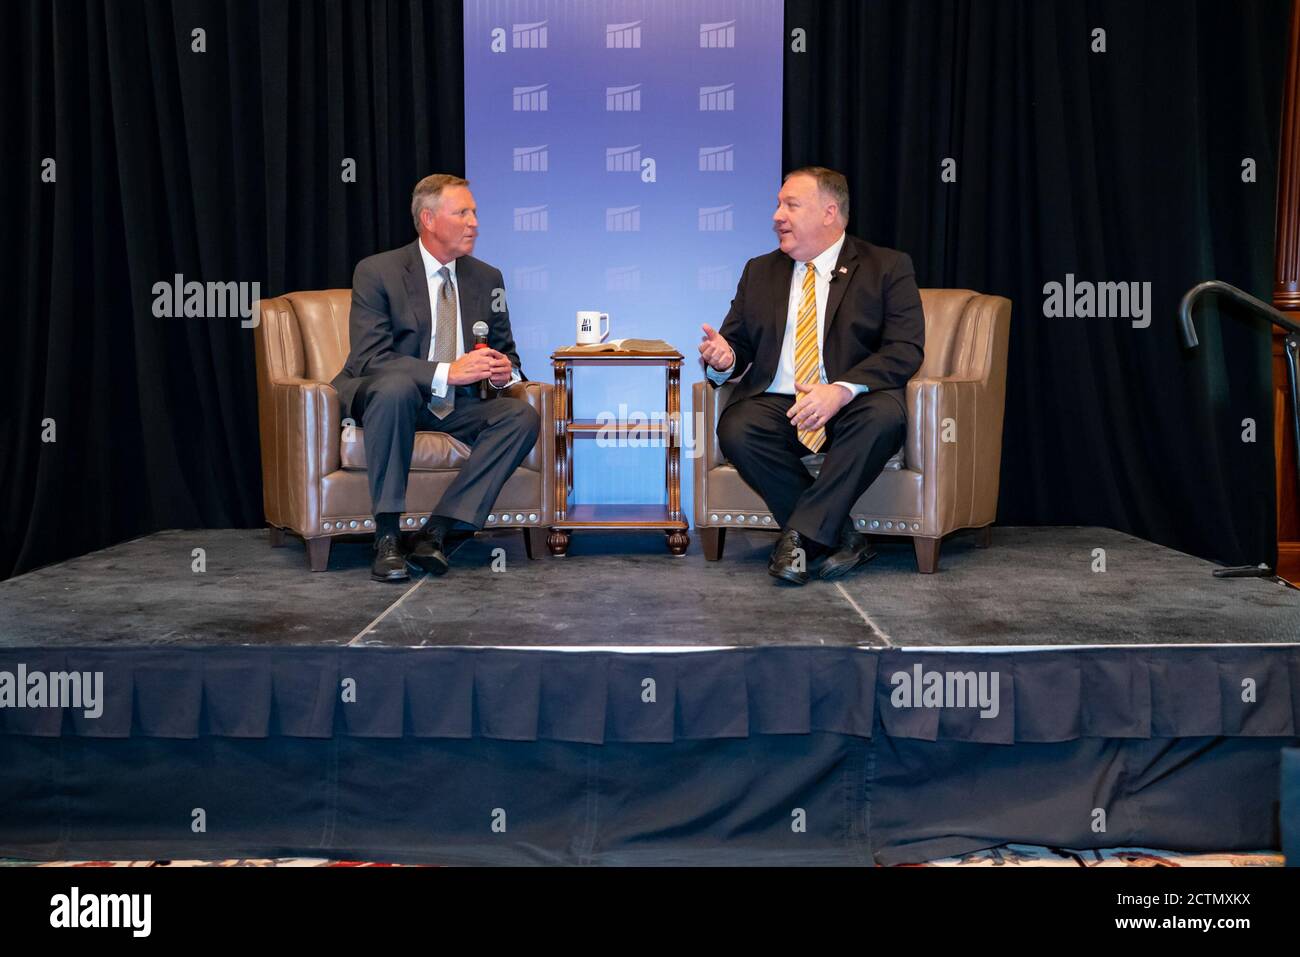 Secretary Pompeo Participates in a Discussion at the World Food Prize Hall in Des Moines, Iowa . Secretary of State Michael R.  Pompeo participates in a discussion moderated by The Family Leader President and CEO Bob Vander Plaats at the World Food Prize Hall of Laureates in Des Mines, Iowa Stock Photo